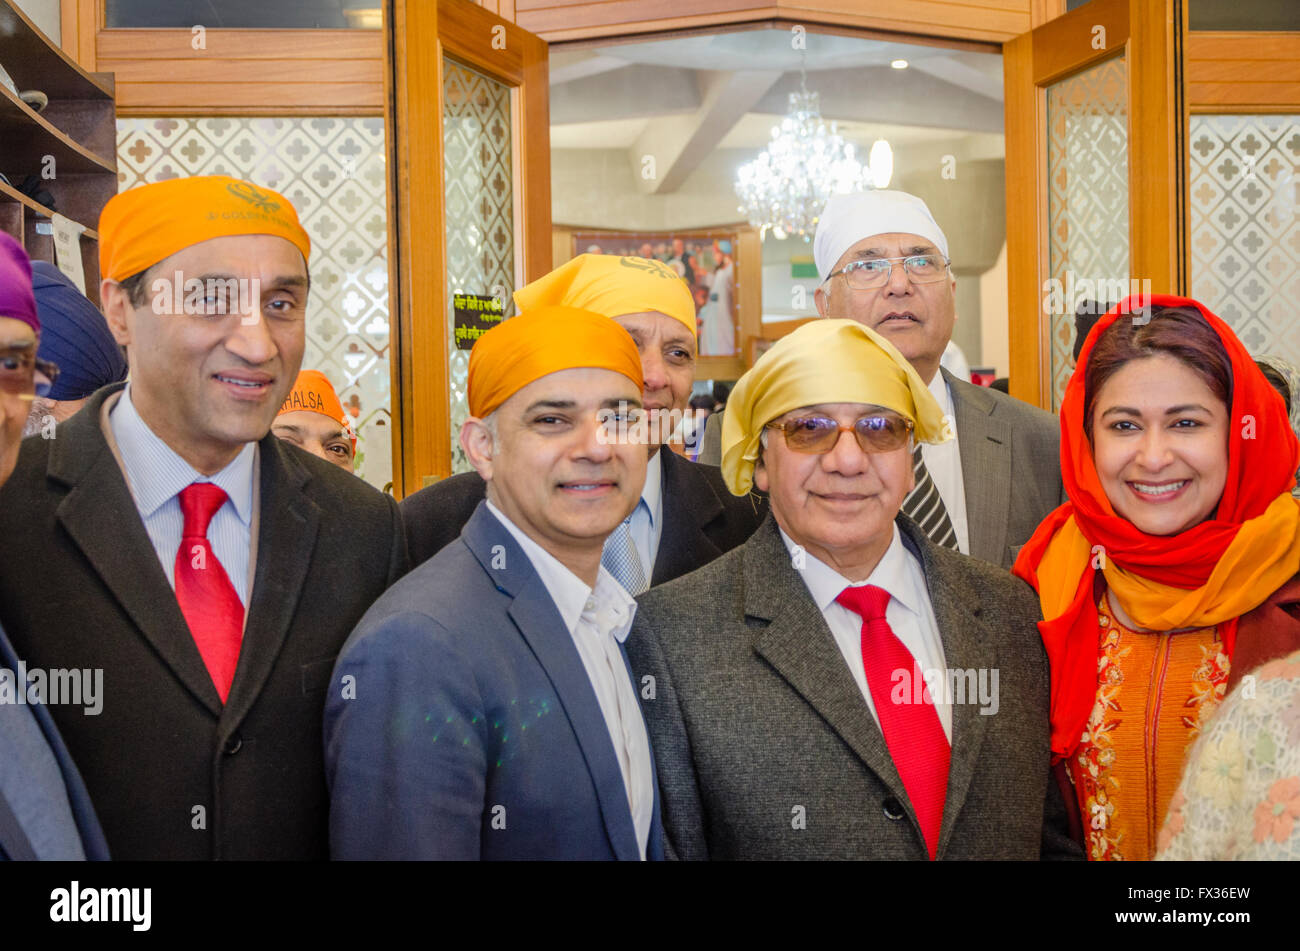 London, UK.  10 April 2016  Sadiq Khan MP, Labour candidate for Mayor of London, visits Southall and the Gurdwara Sri Guru Singh Sabha temple at the start of the Vaisakhi festival in Southall, west London. Tens of thousands of people took part in the procession from the Sri Guru Singh Sabha Gurdwara to celebrate Vaisakhi, the harvest festival.  Credit:  Ilyas Ayub/ Alamy Live News Stock Photo